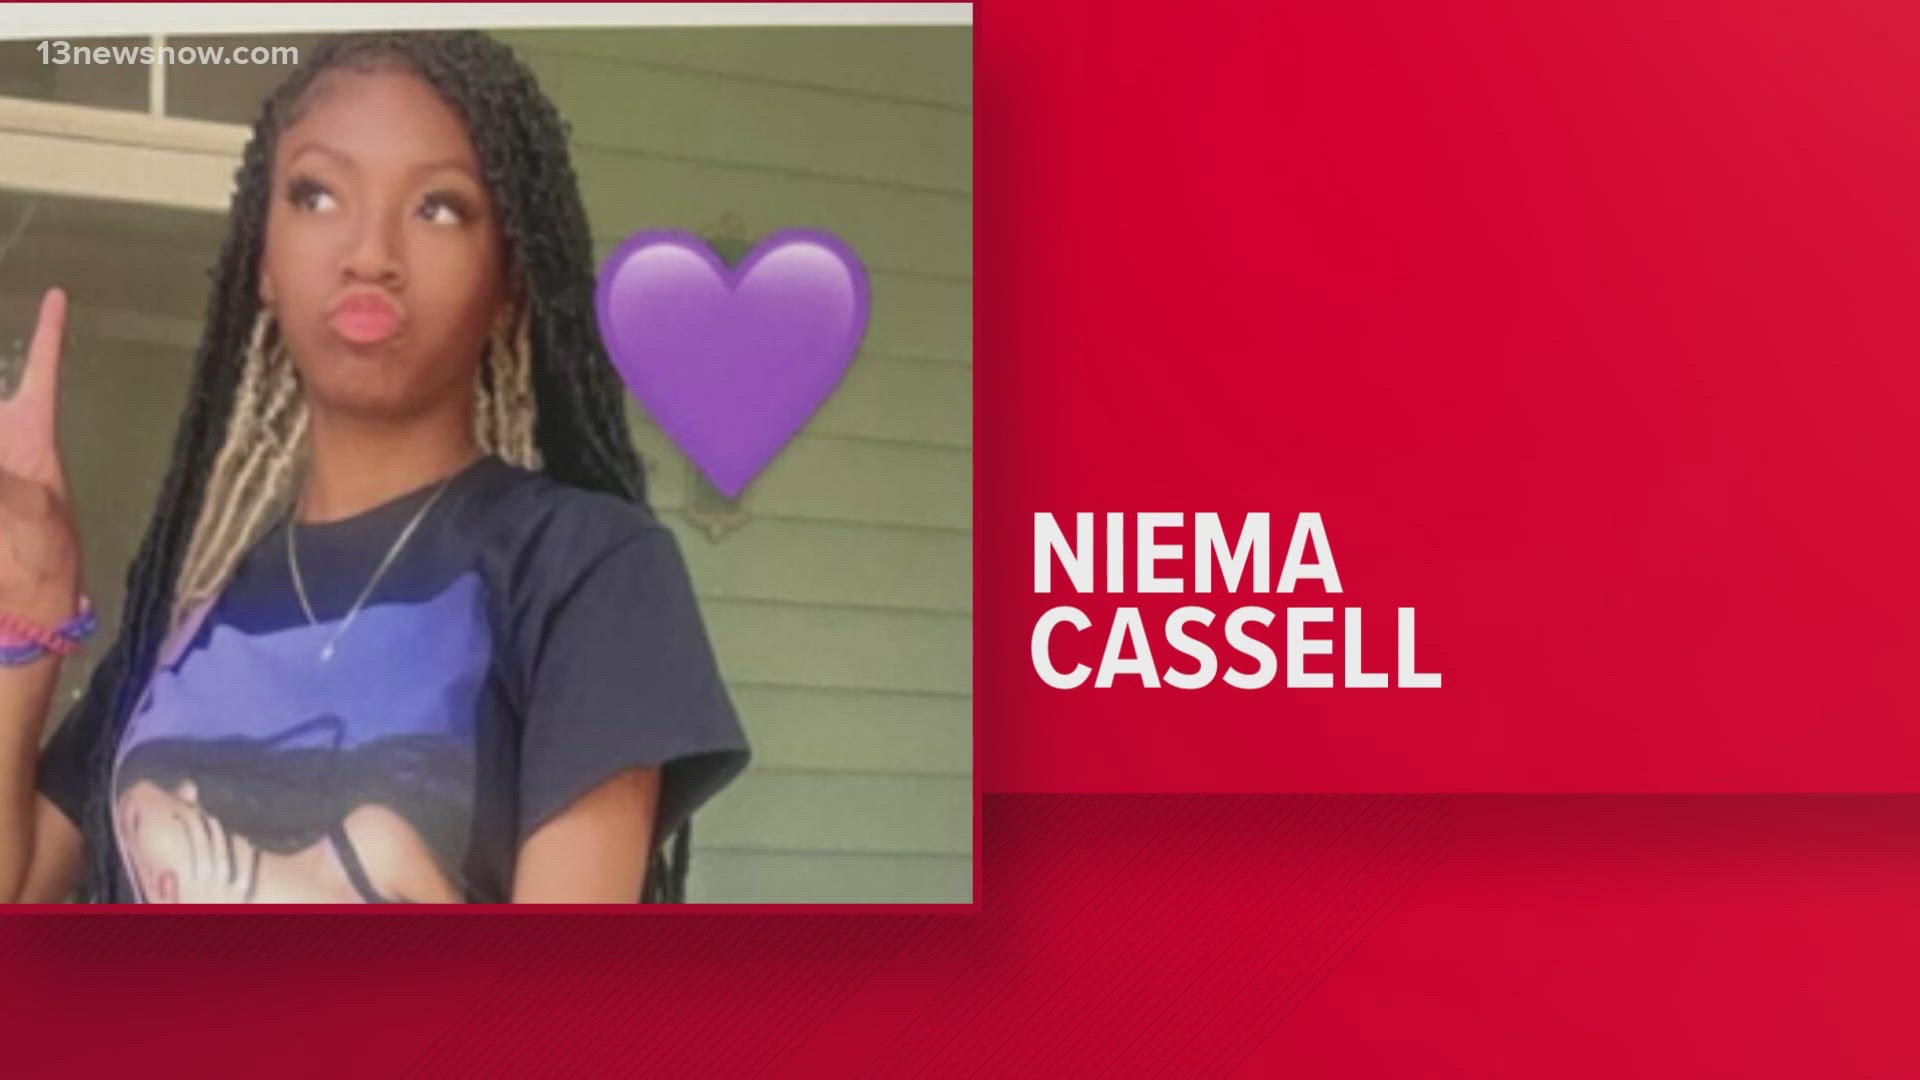 A missing Portsmouth teen was found safe and is reunited with her family after disappearing Tuesday morning.